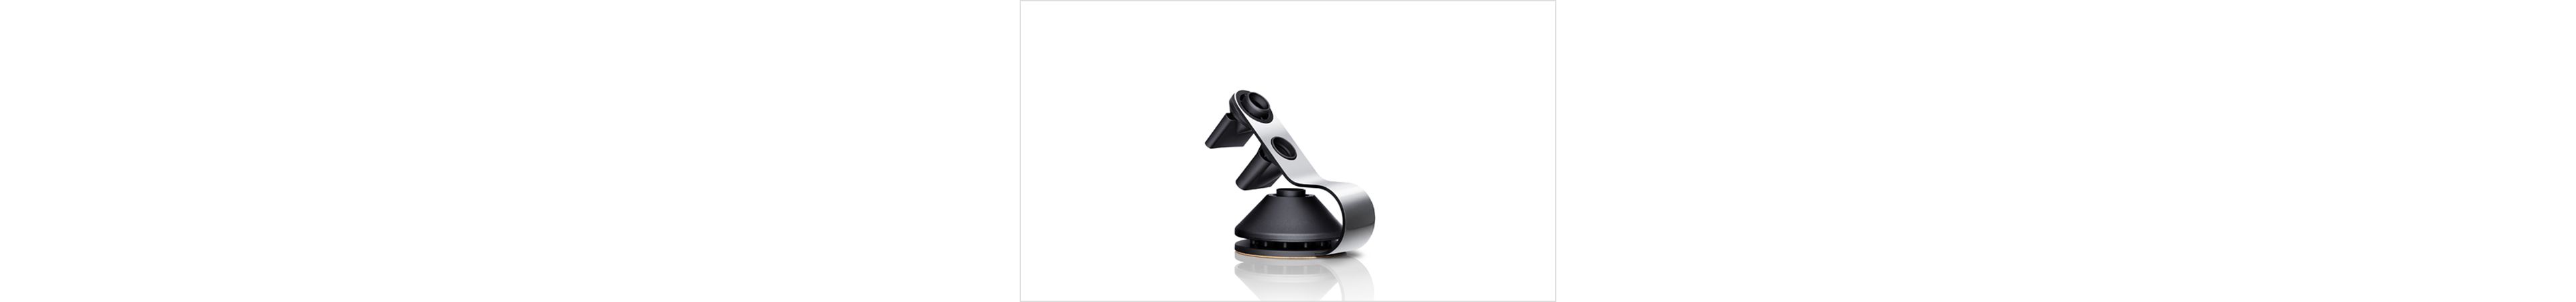 Dyson Supersonic™ hair dryer stand (Nickel/Black) | Dyson Supersonic  Accessories | Dyson Australia